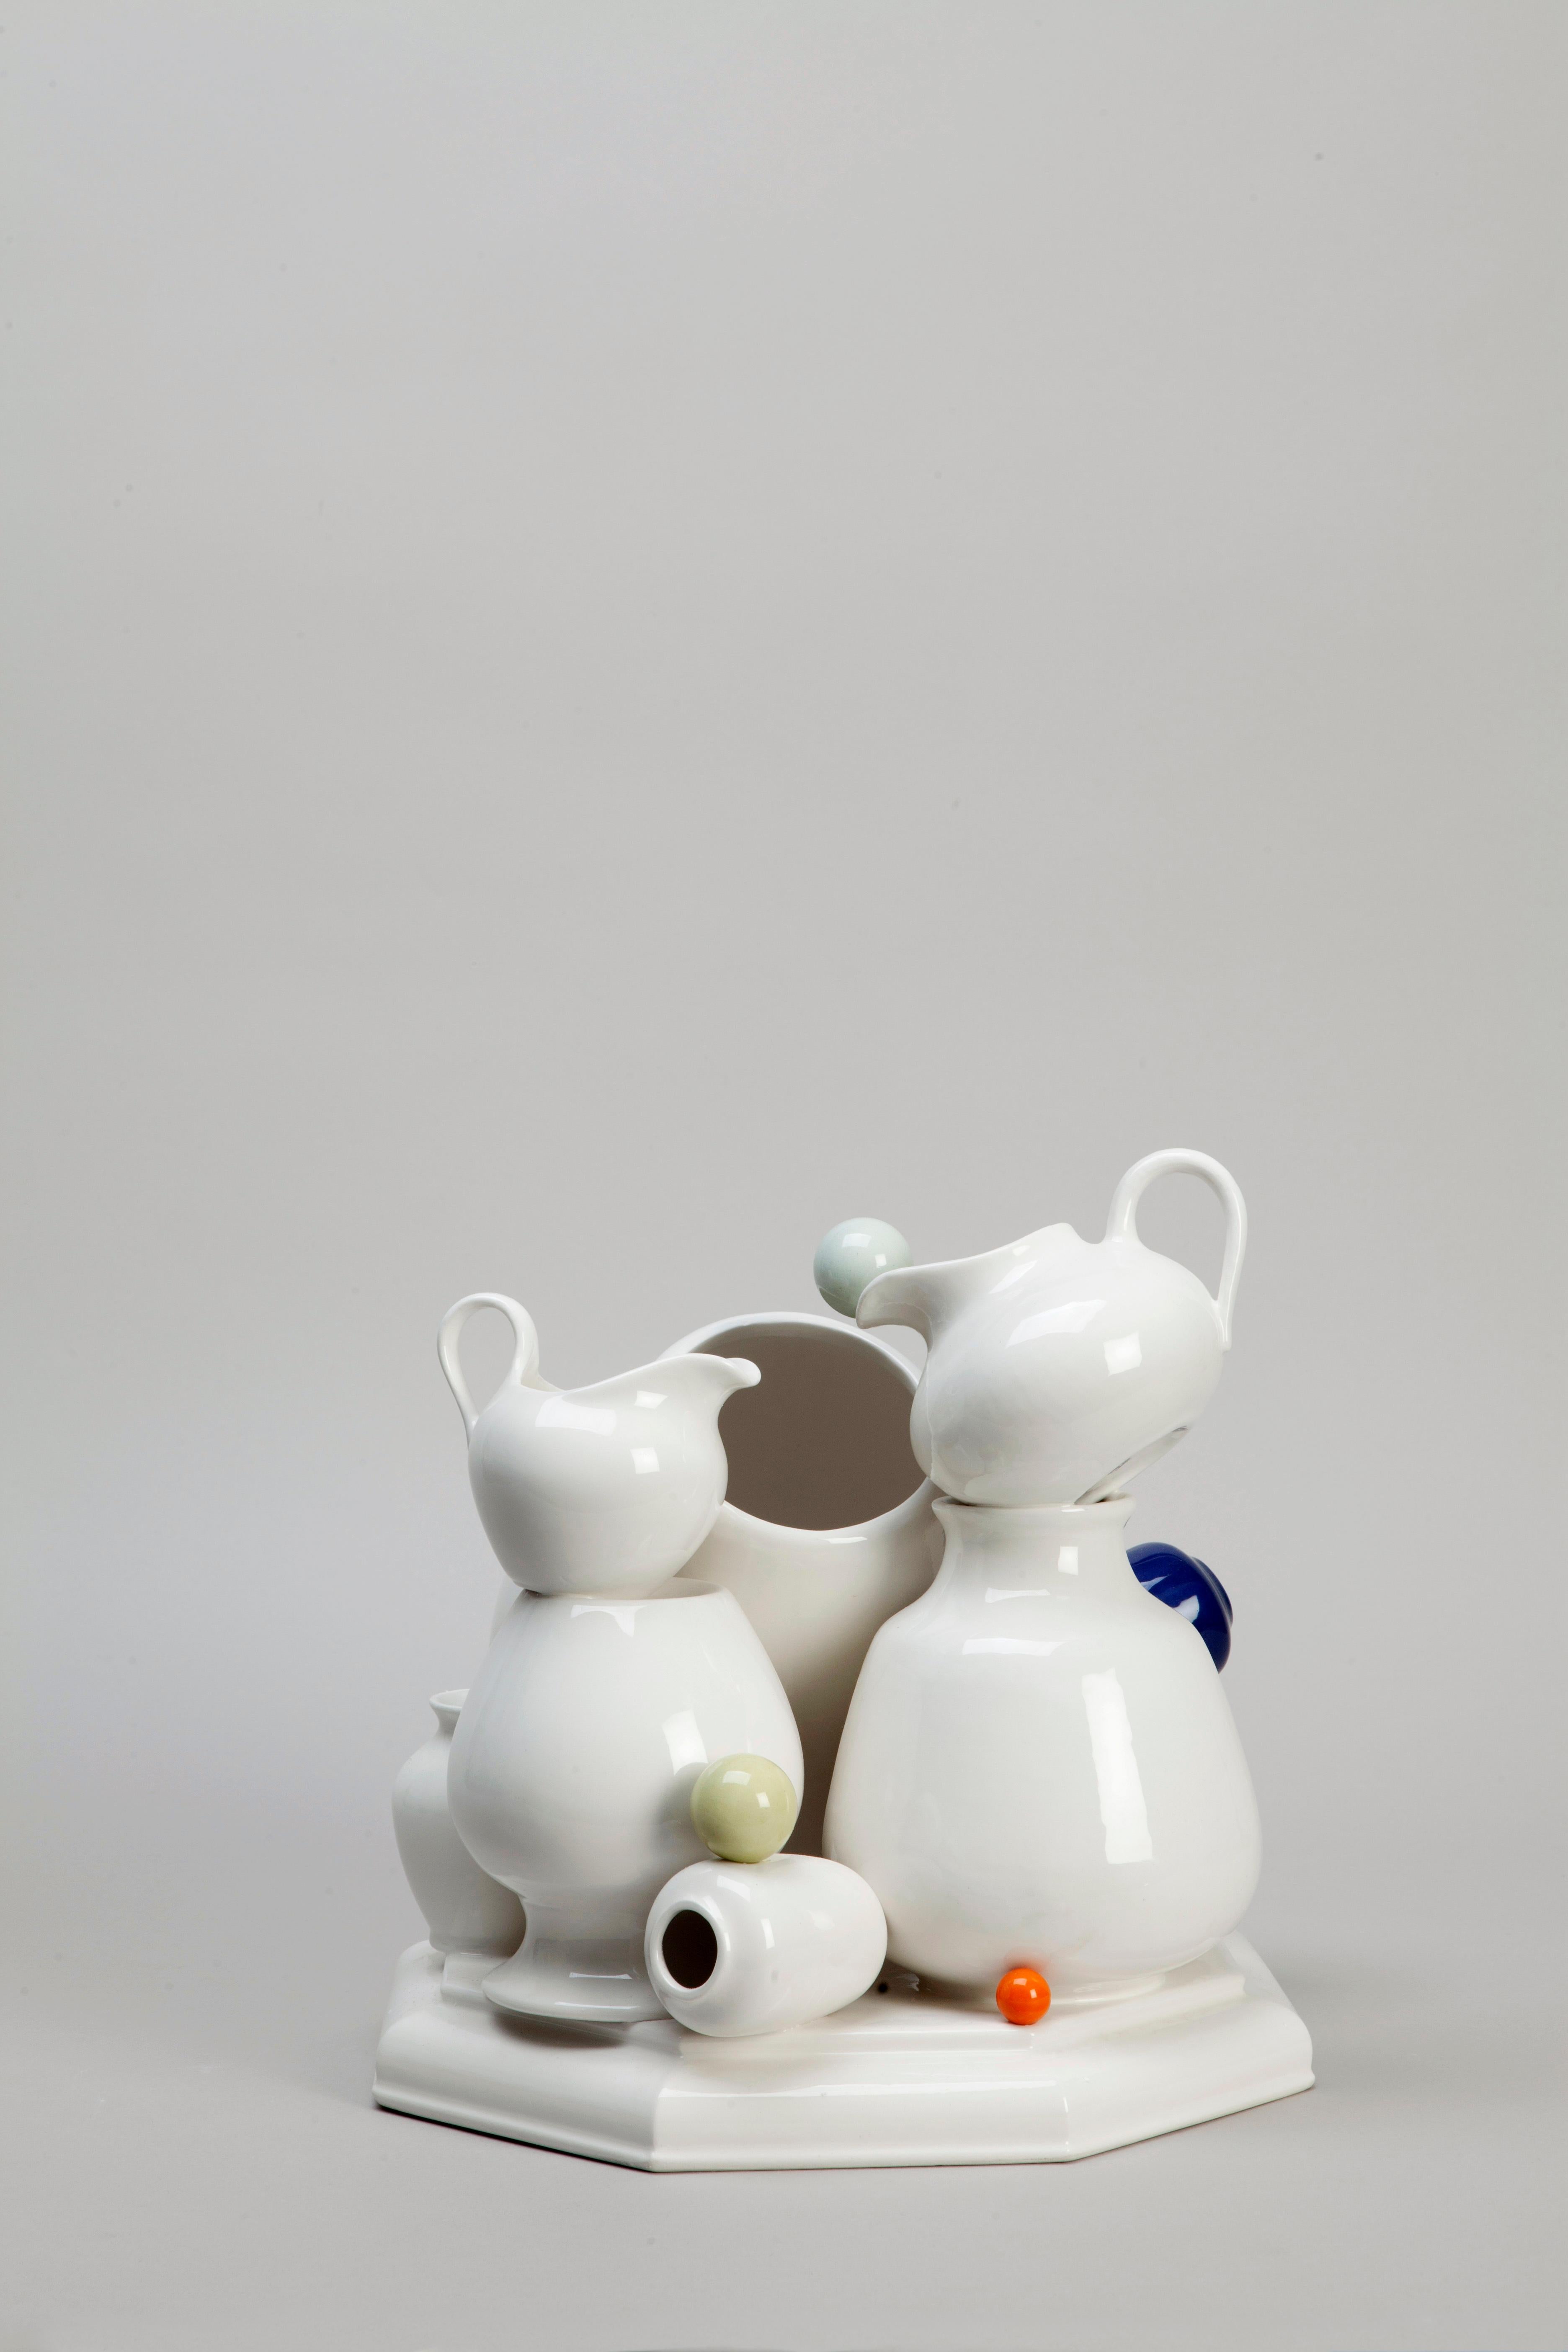 Untitled, 2020, glazed earthenware, measures: approximate H 16 x 15 x 15 cm

Andrea Salvatori (Italy, 1975) is an internationally renowned visual artist working with the ceramic medium to realize often ironic and witty sculptures, sometimes